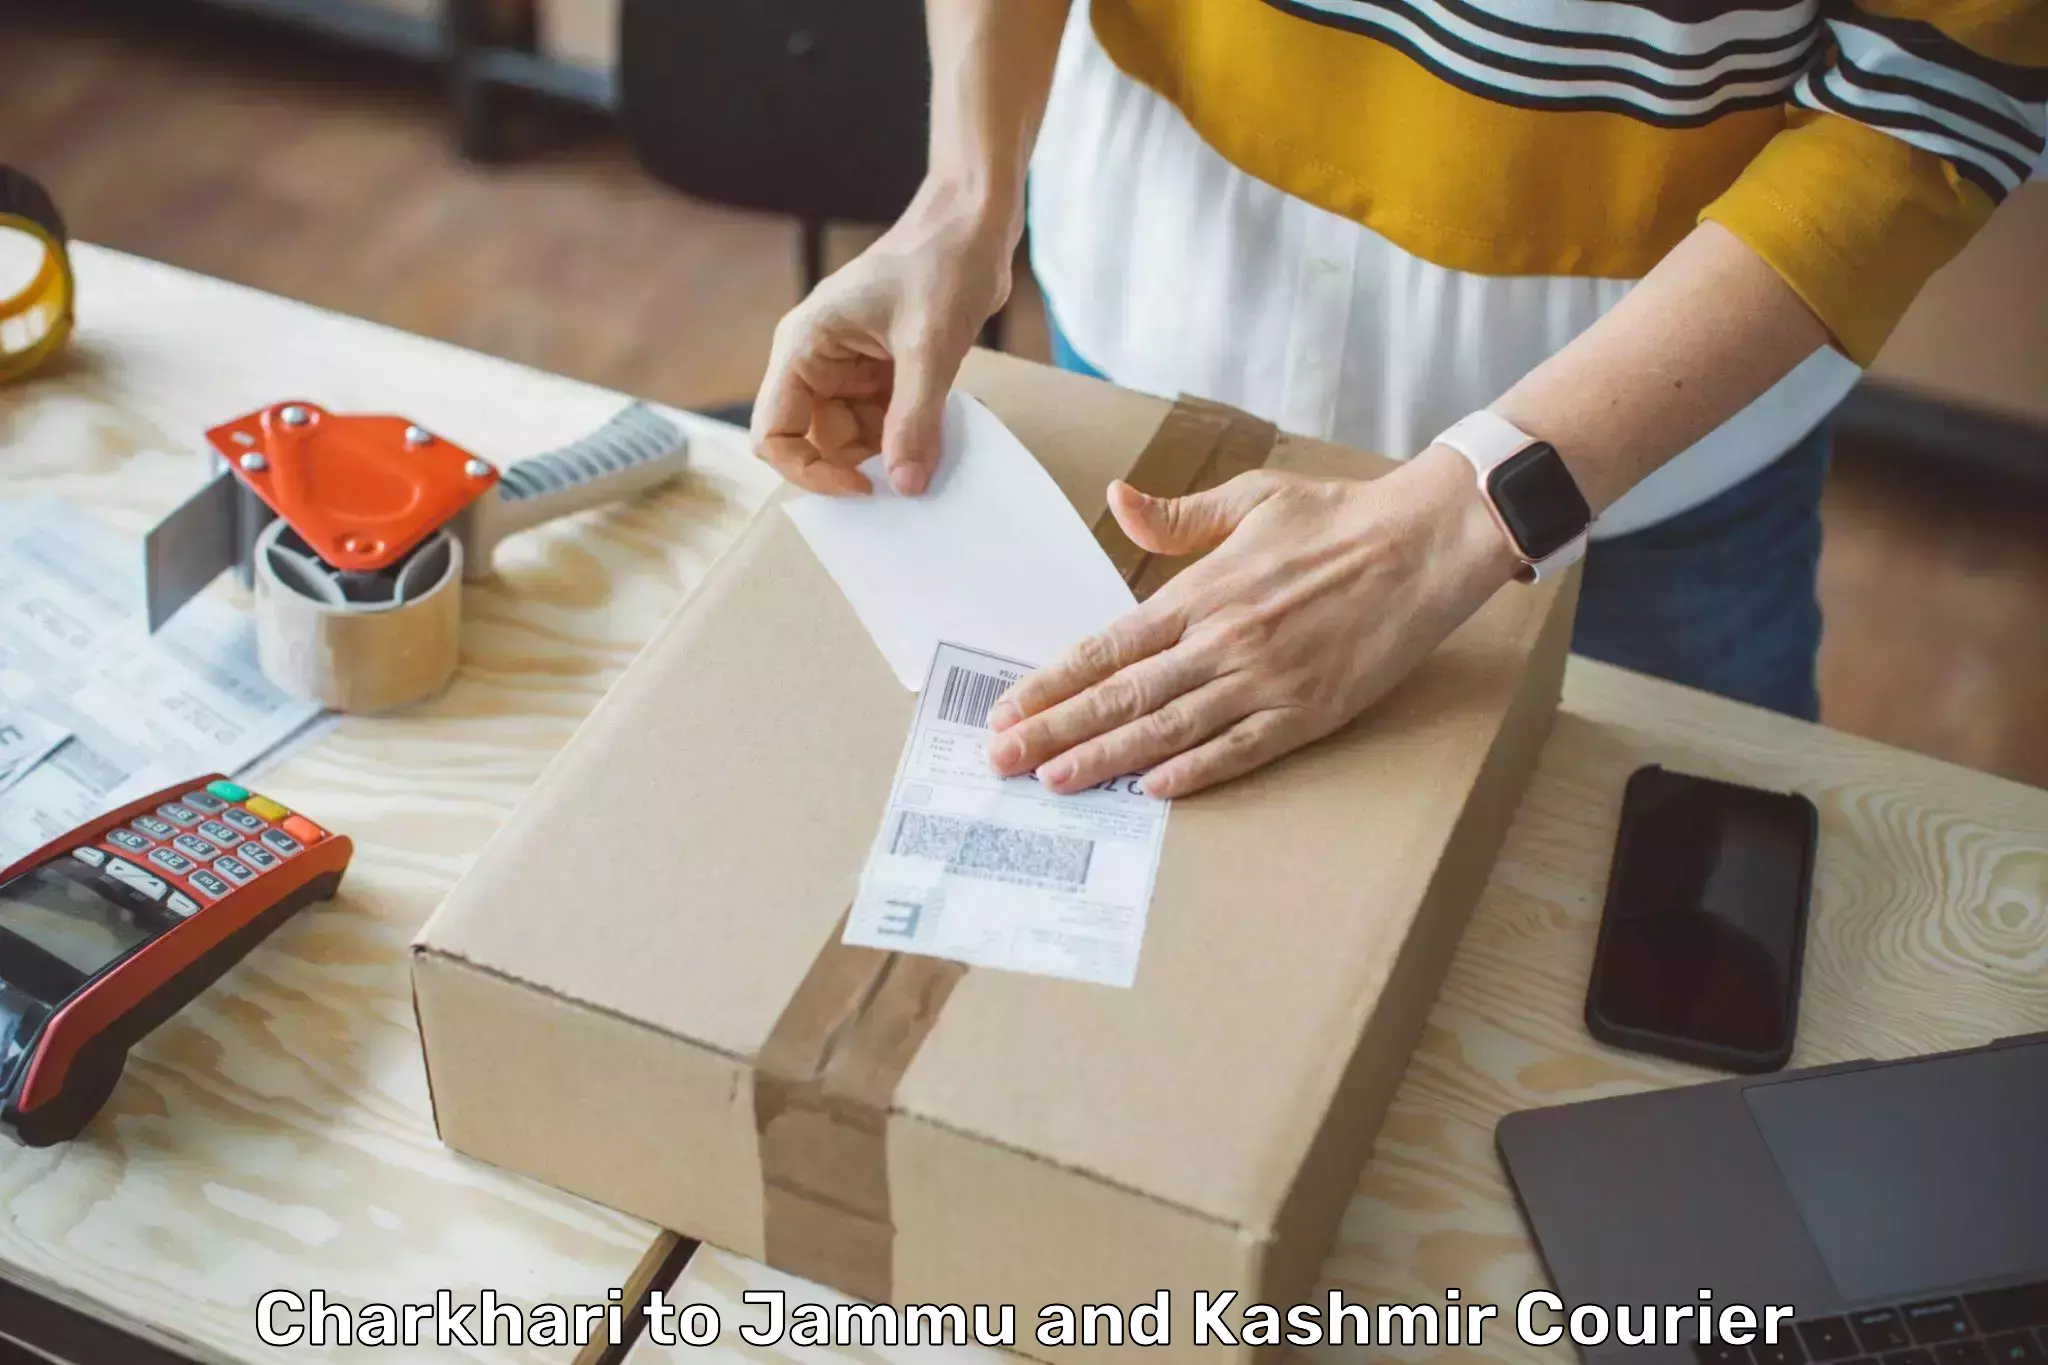 High-priority parcel service Charkhari to Jammu and Kashmir